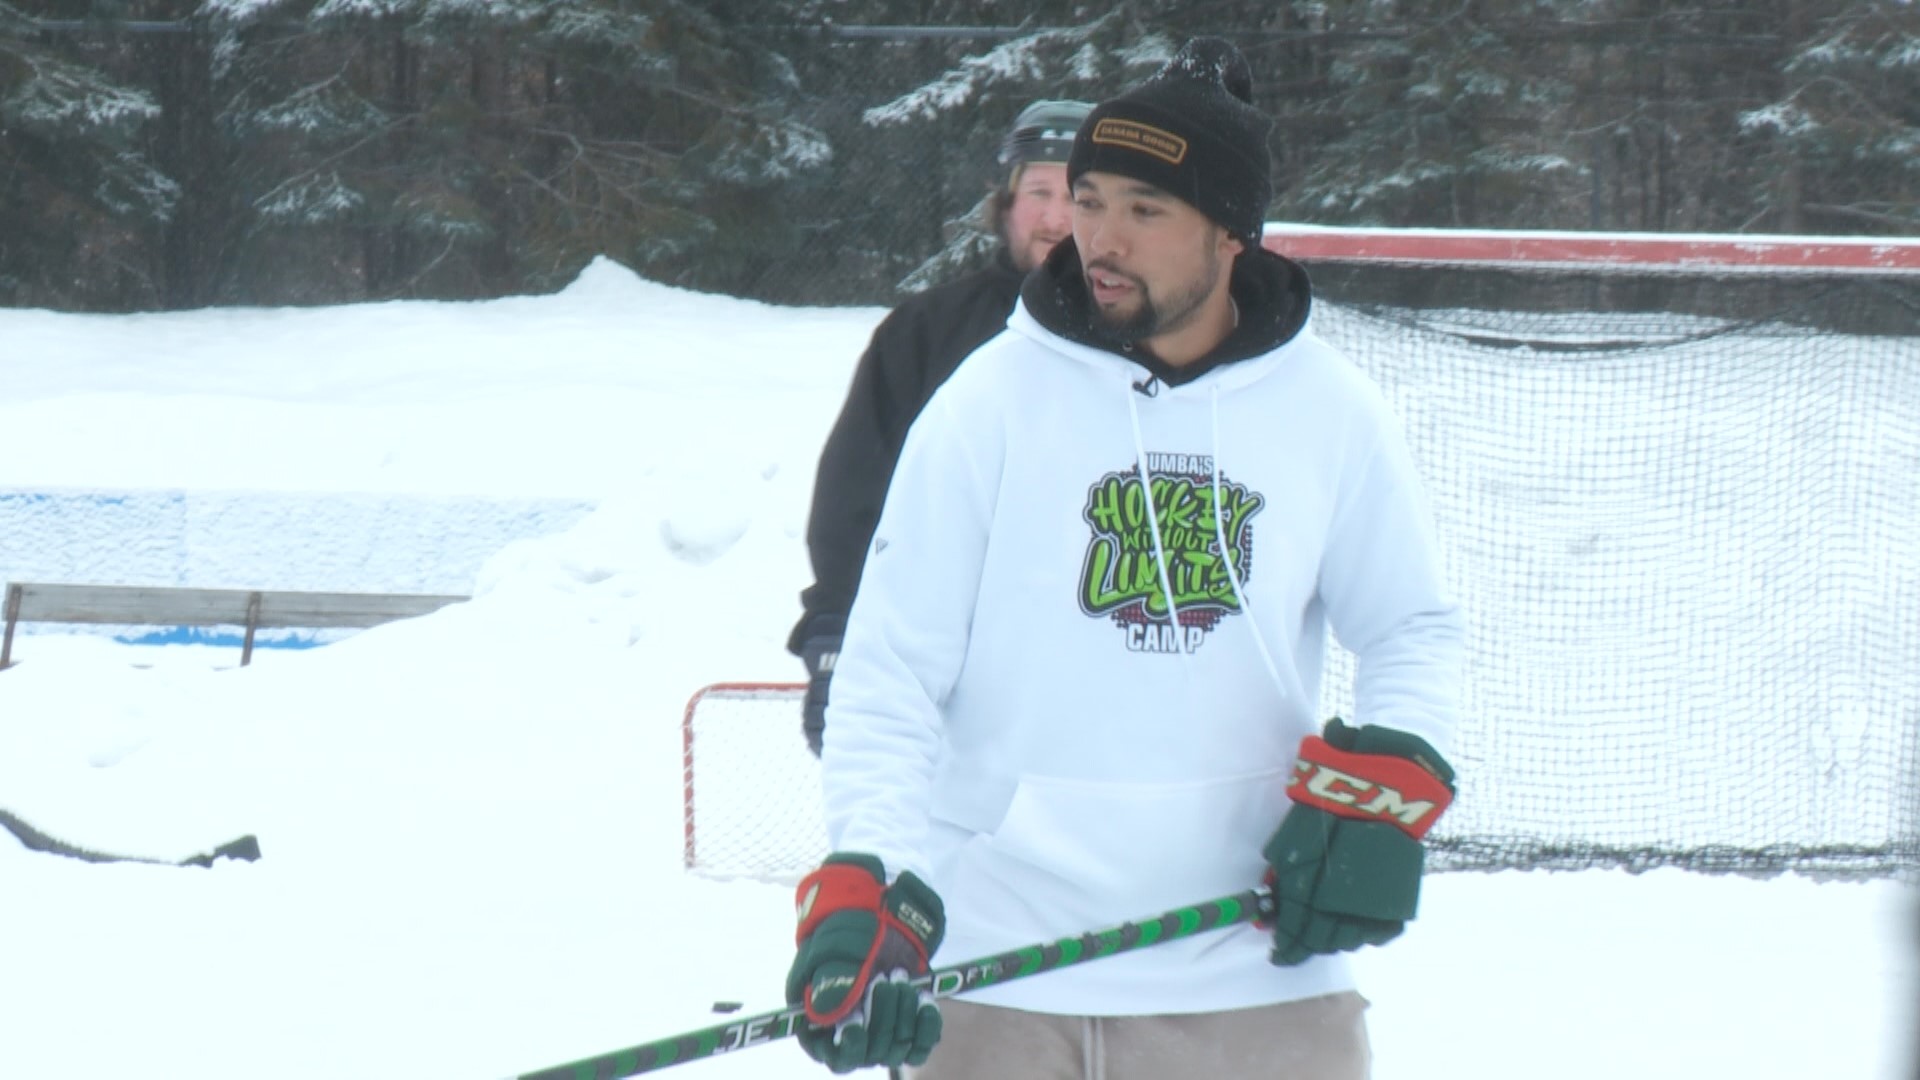 The Wild defenseman gives back in an effort to grow the sport of hockey.